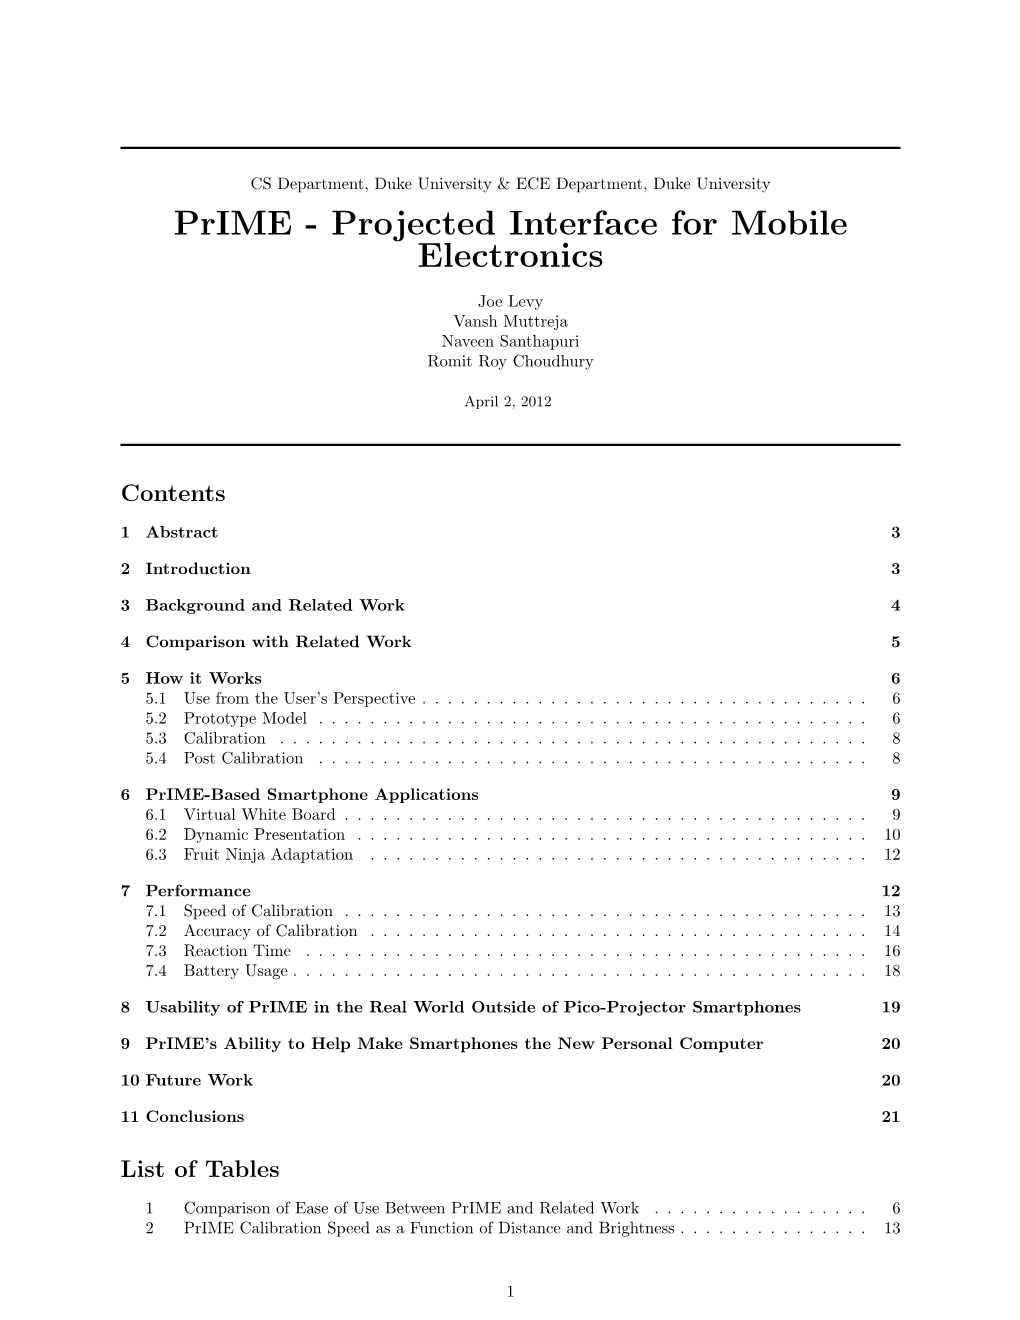 Prime - Projected Interface for Mobile Electronics